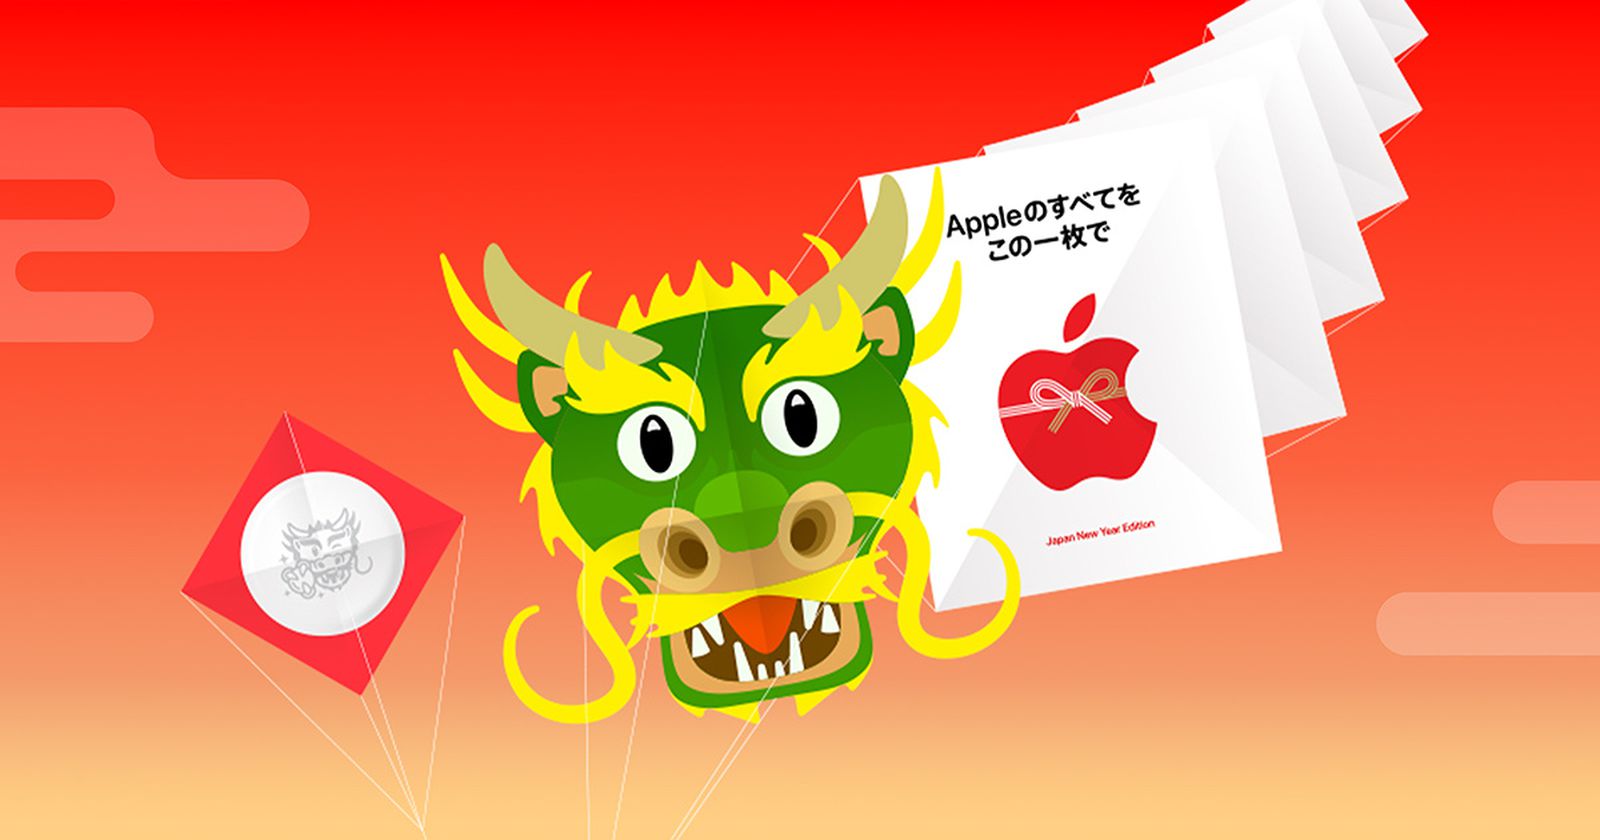 Apple unveils its annual Japanese New Year promotion with a special AirTag